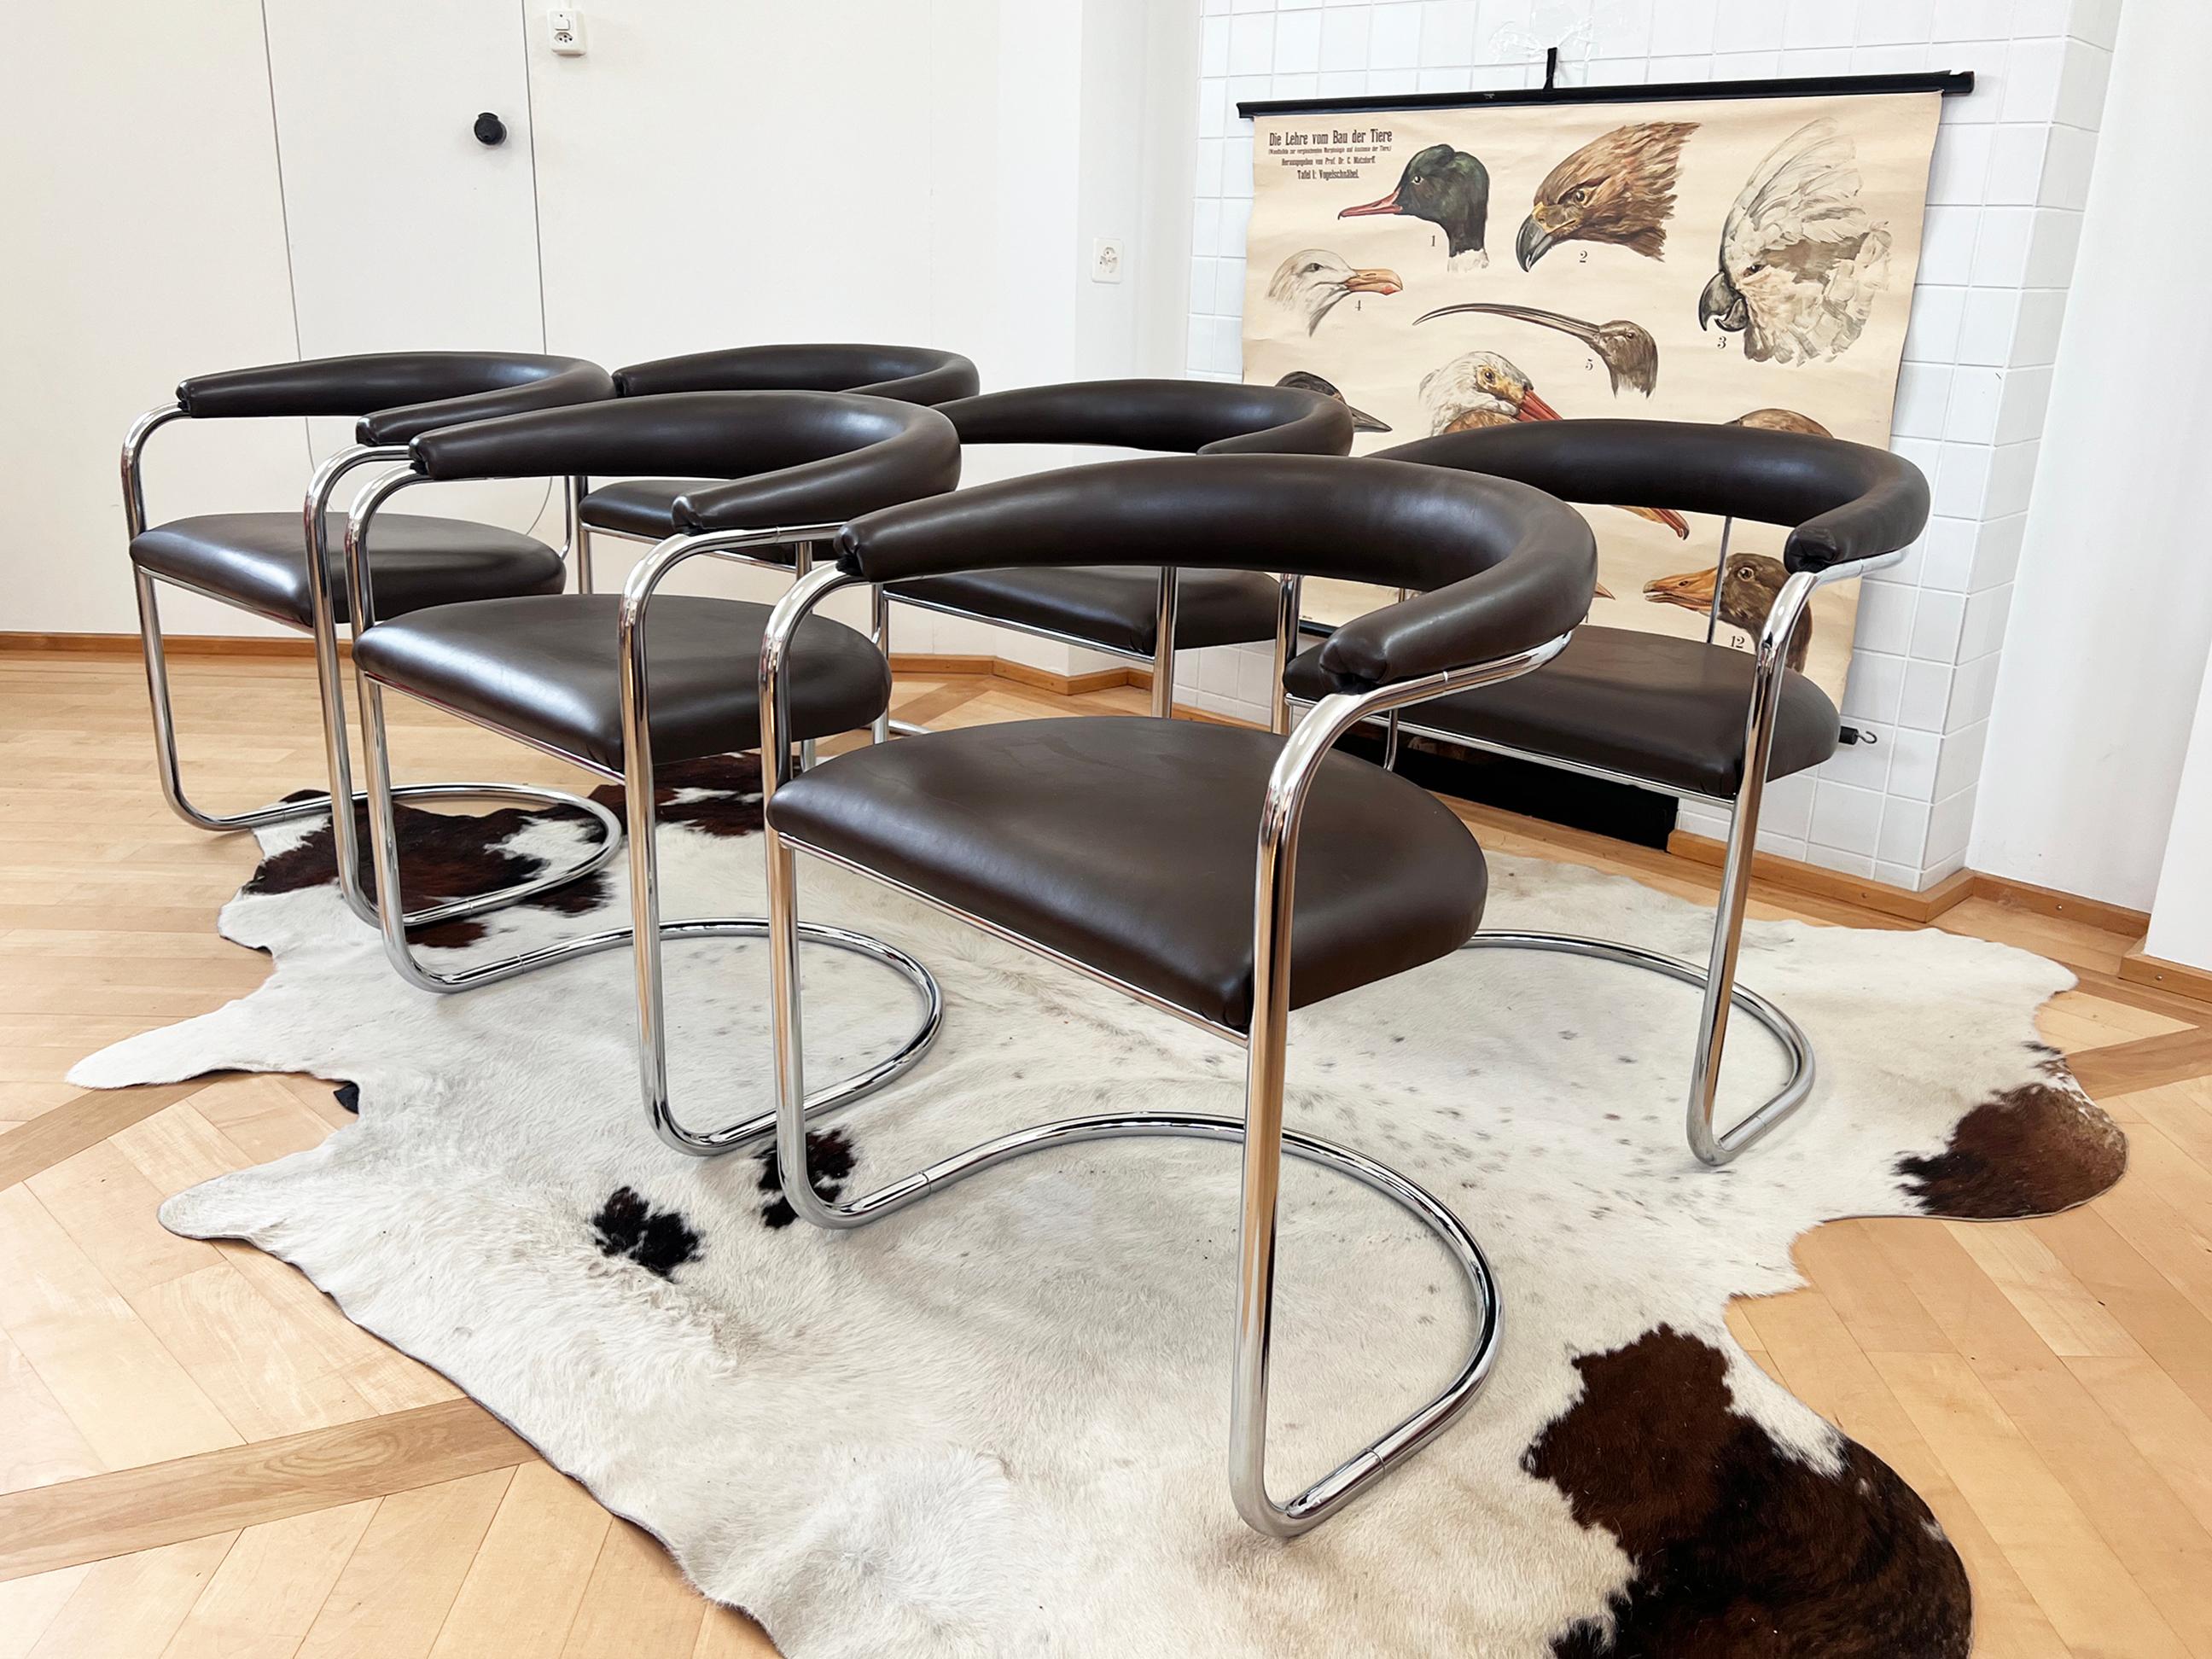 Stunning Anton Lorenz for Thonet Cantilevered Armchairs, set of 6
They feature very dark brown upholstered backrests and seats with polished chrome tubular frames. All are in superb condition throughout.

The chairs were acquired by a collector in